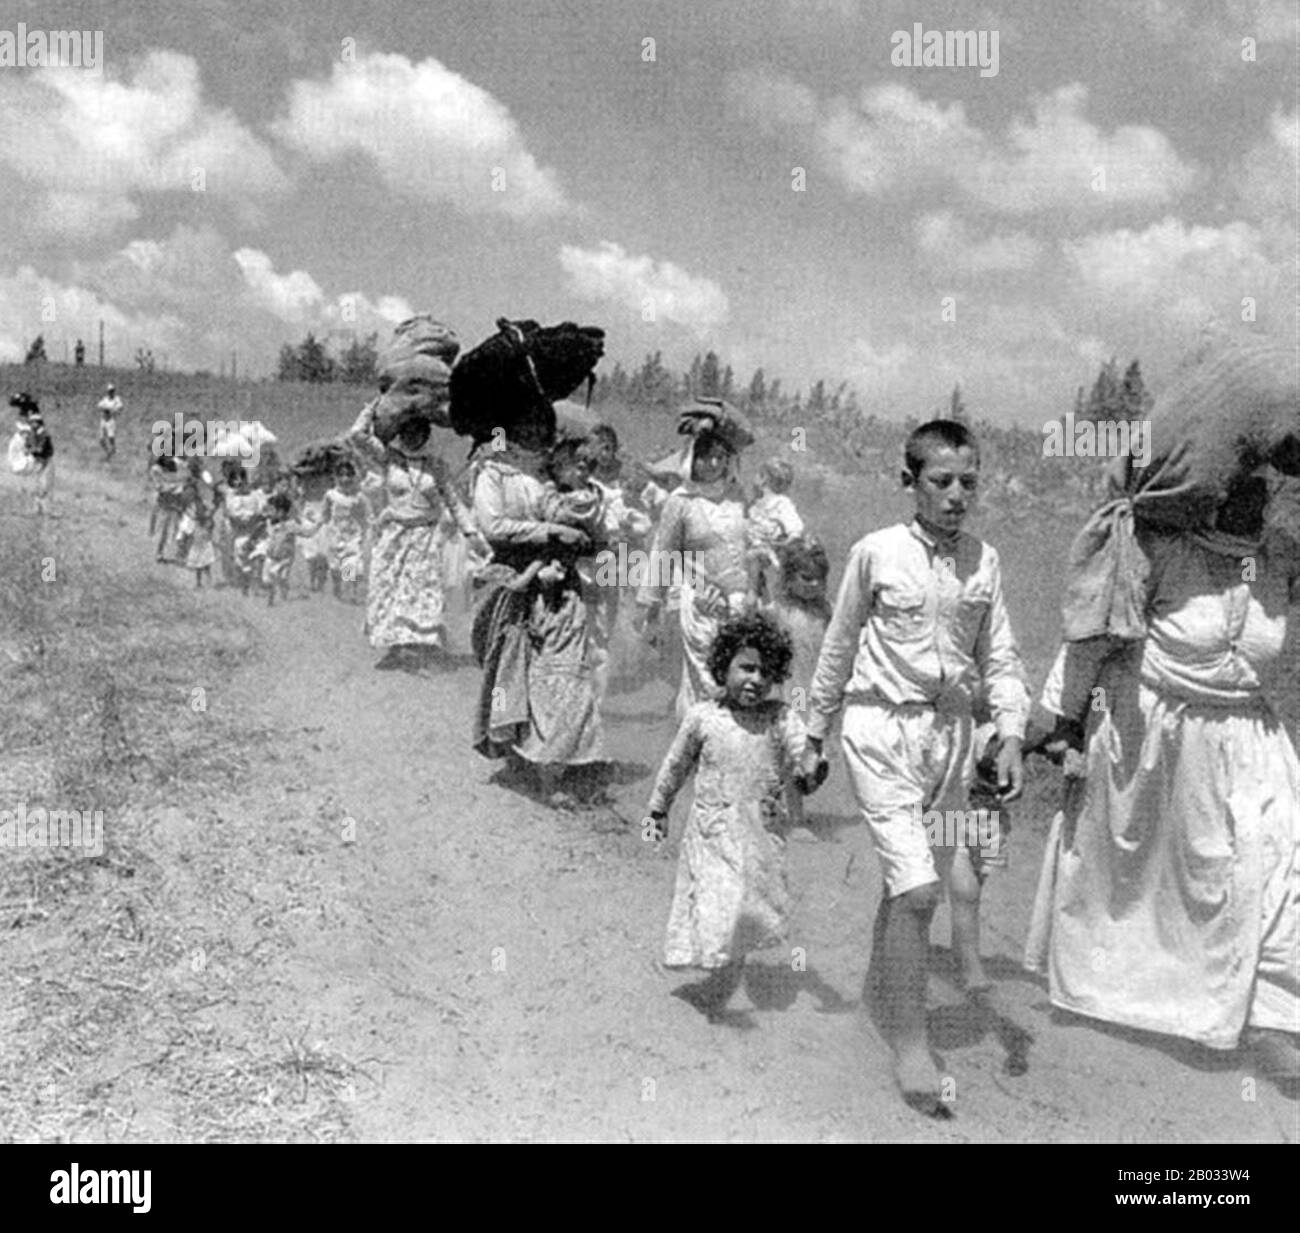 The 1948 Palestinian exodus, known in Arabic as the Nakba (Arabic: النكبة, an-Nakbah, lit.'catastrophe'), occurred when more than 700,000 Palestinian Arabs fled or were expelled from their homes, during the 1947–1948 Civil War in Mandatory Palestine and the 1948 Arab–Israeli War.  The exact number of refugees is a matter of dispute, but around 80 percent of the Arab inhabitants of what became Israel (50 percent of the Arab total of Mandatory Palestine) left or were expelled from their homes.  Later in the war, Palestinians were forcibly expelled as part of 'Plan Dalet' in a policy of 'ethnic Stock Photo